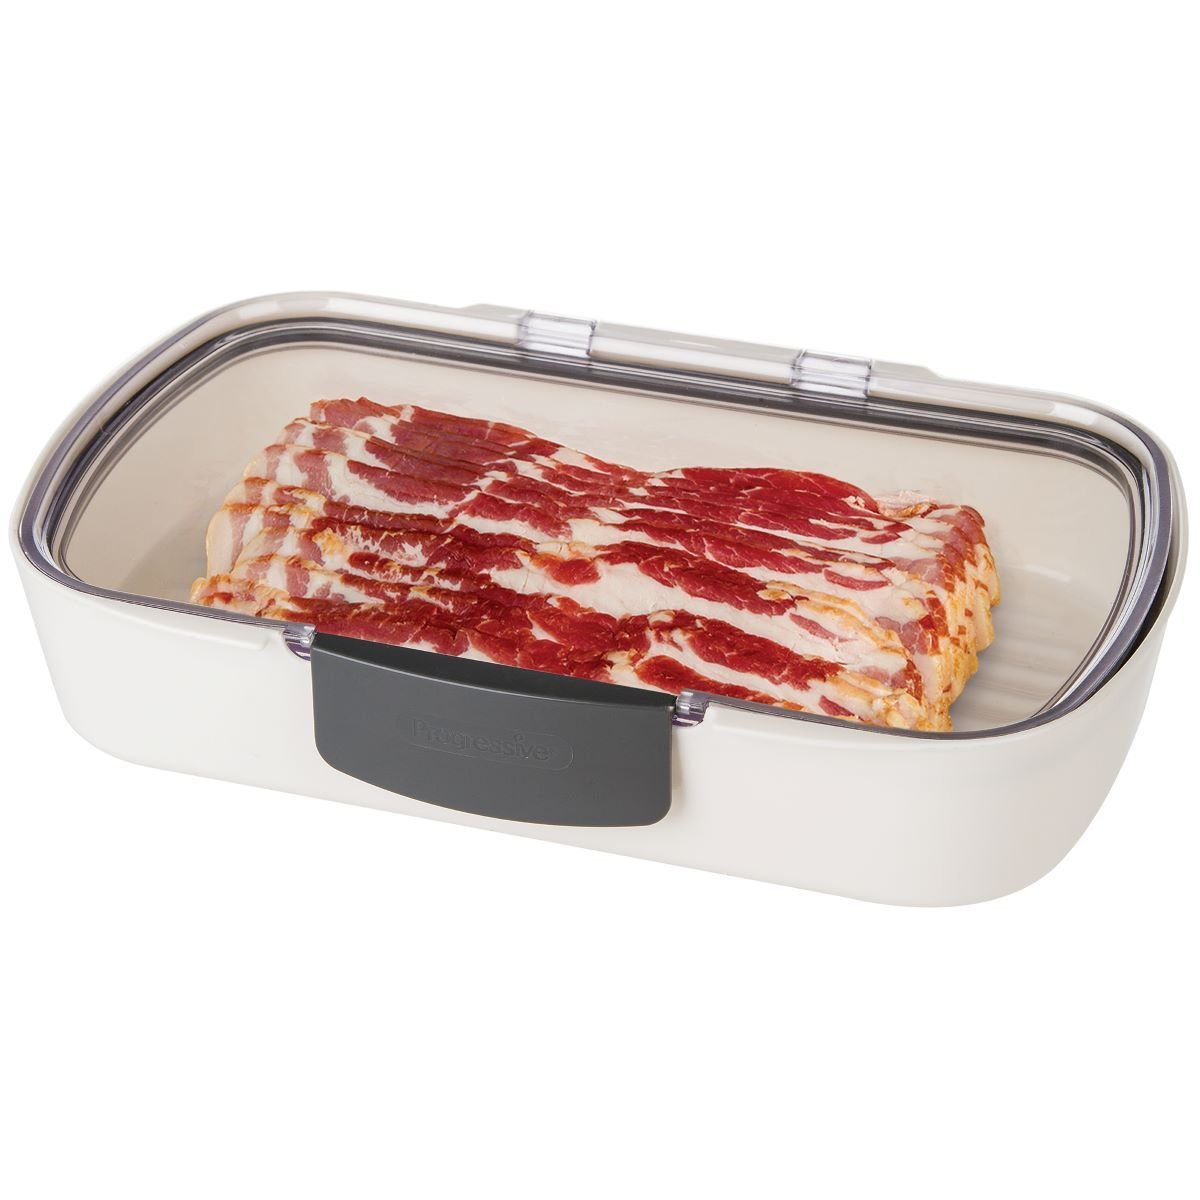 These Deli Prokeepers are my new favorite container - and Zulily curre